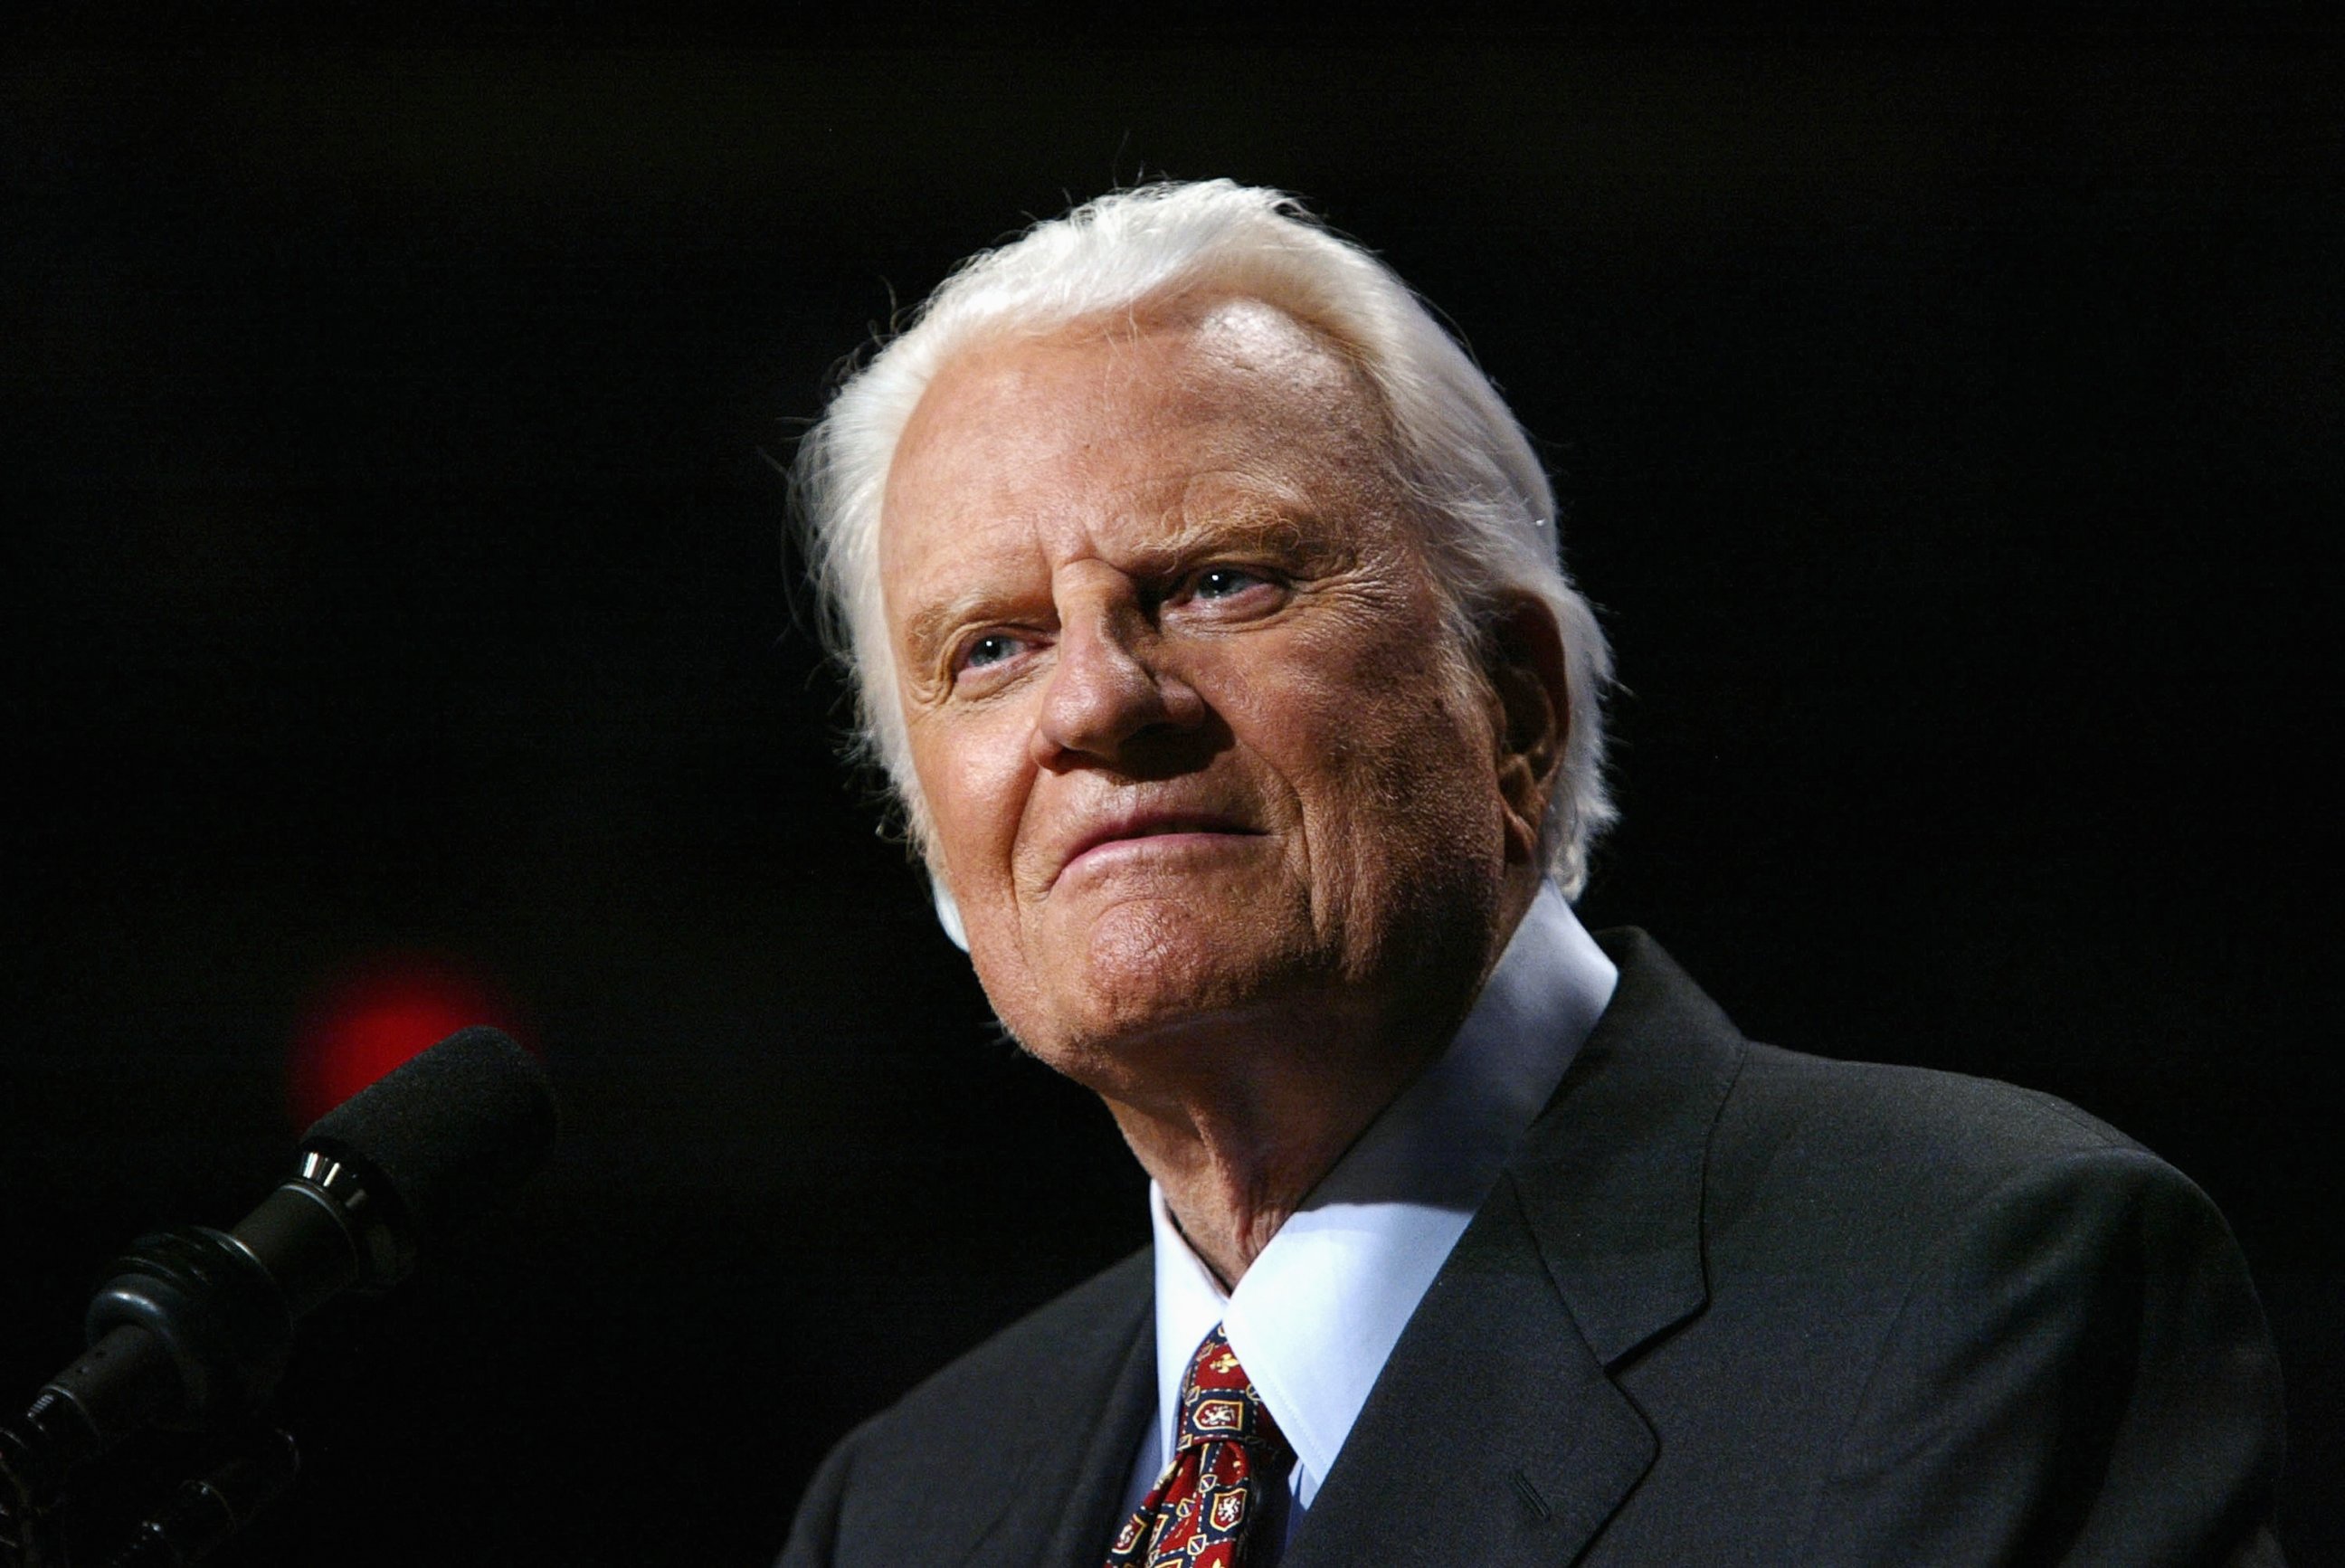 PHOTO: Evangelist Billy Graham looks on from the podium at a Billy Graham rally on June 13, 2003 in Oklahoma City, Okla.